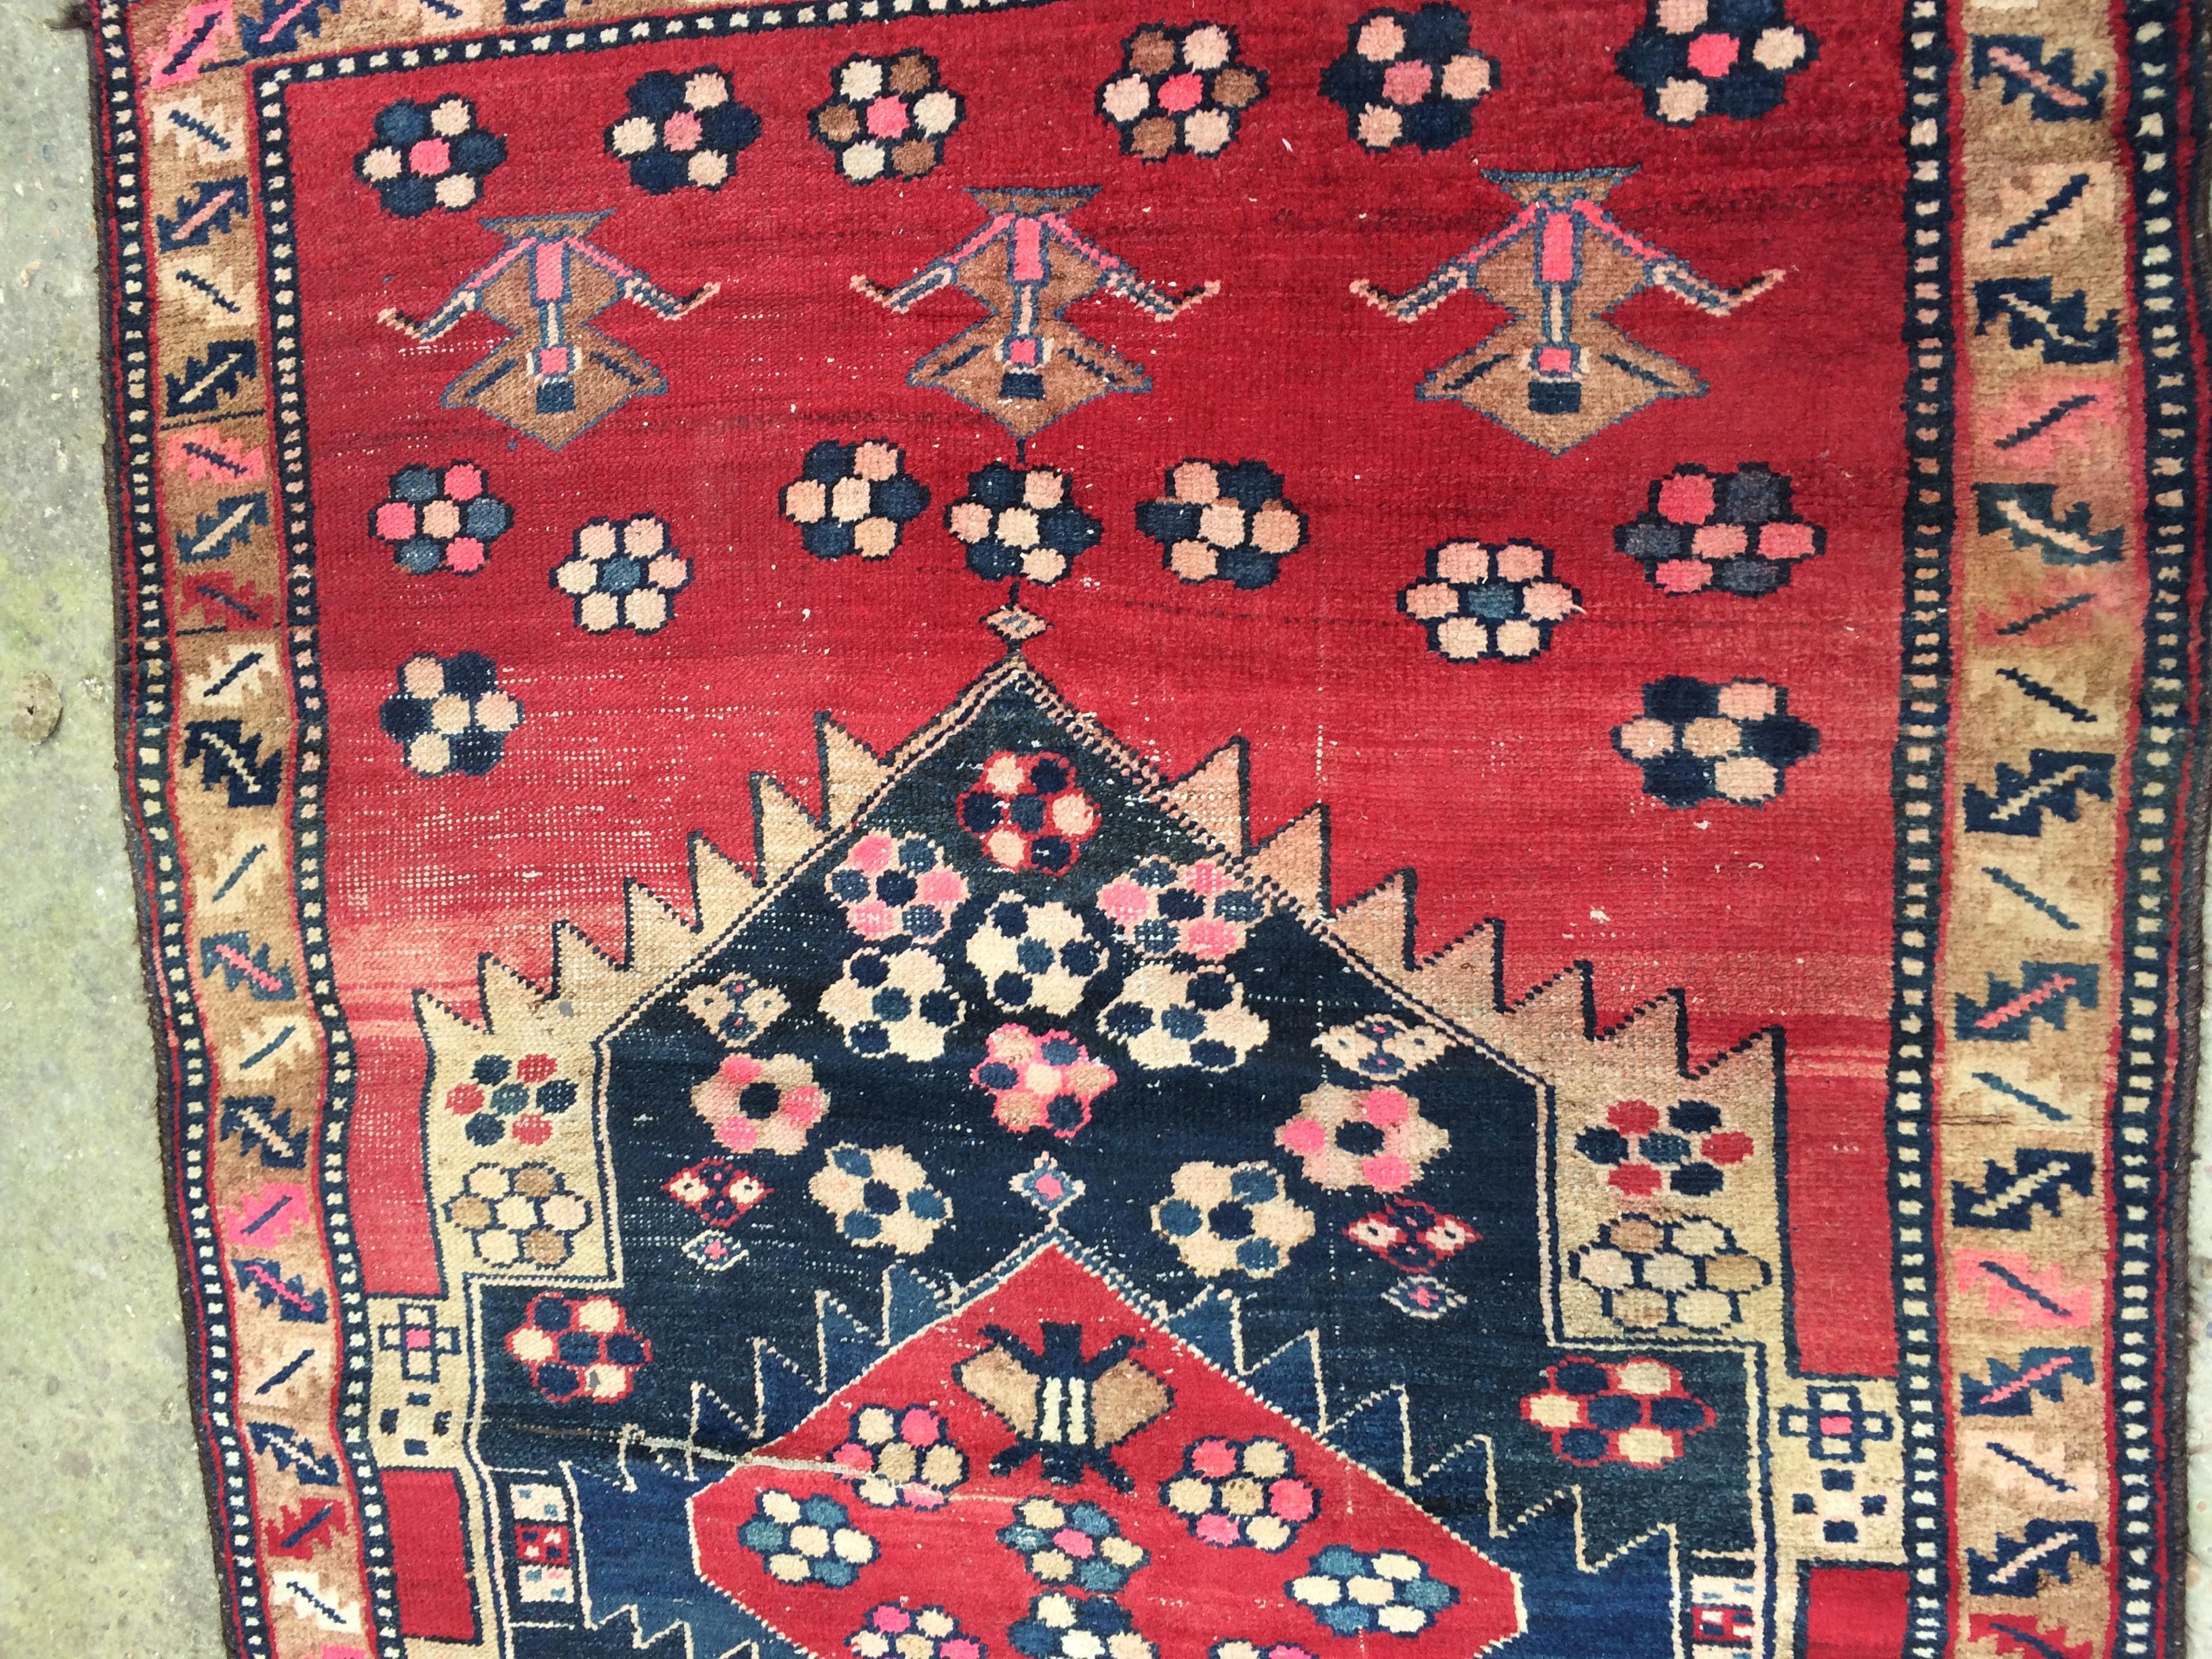 Early 20th Century Semi-Antique Accent Rug 3